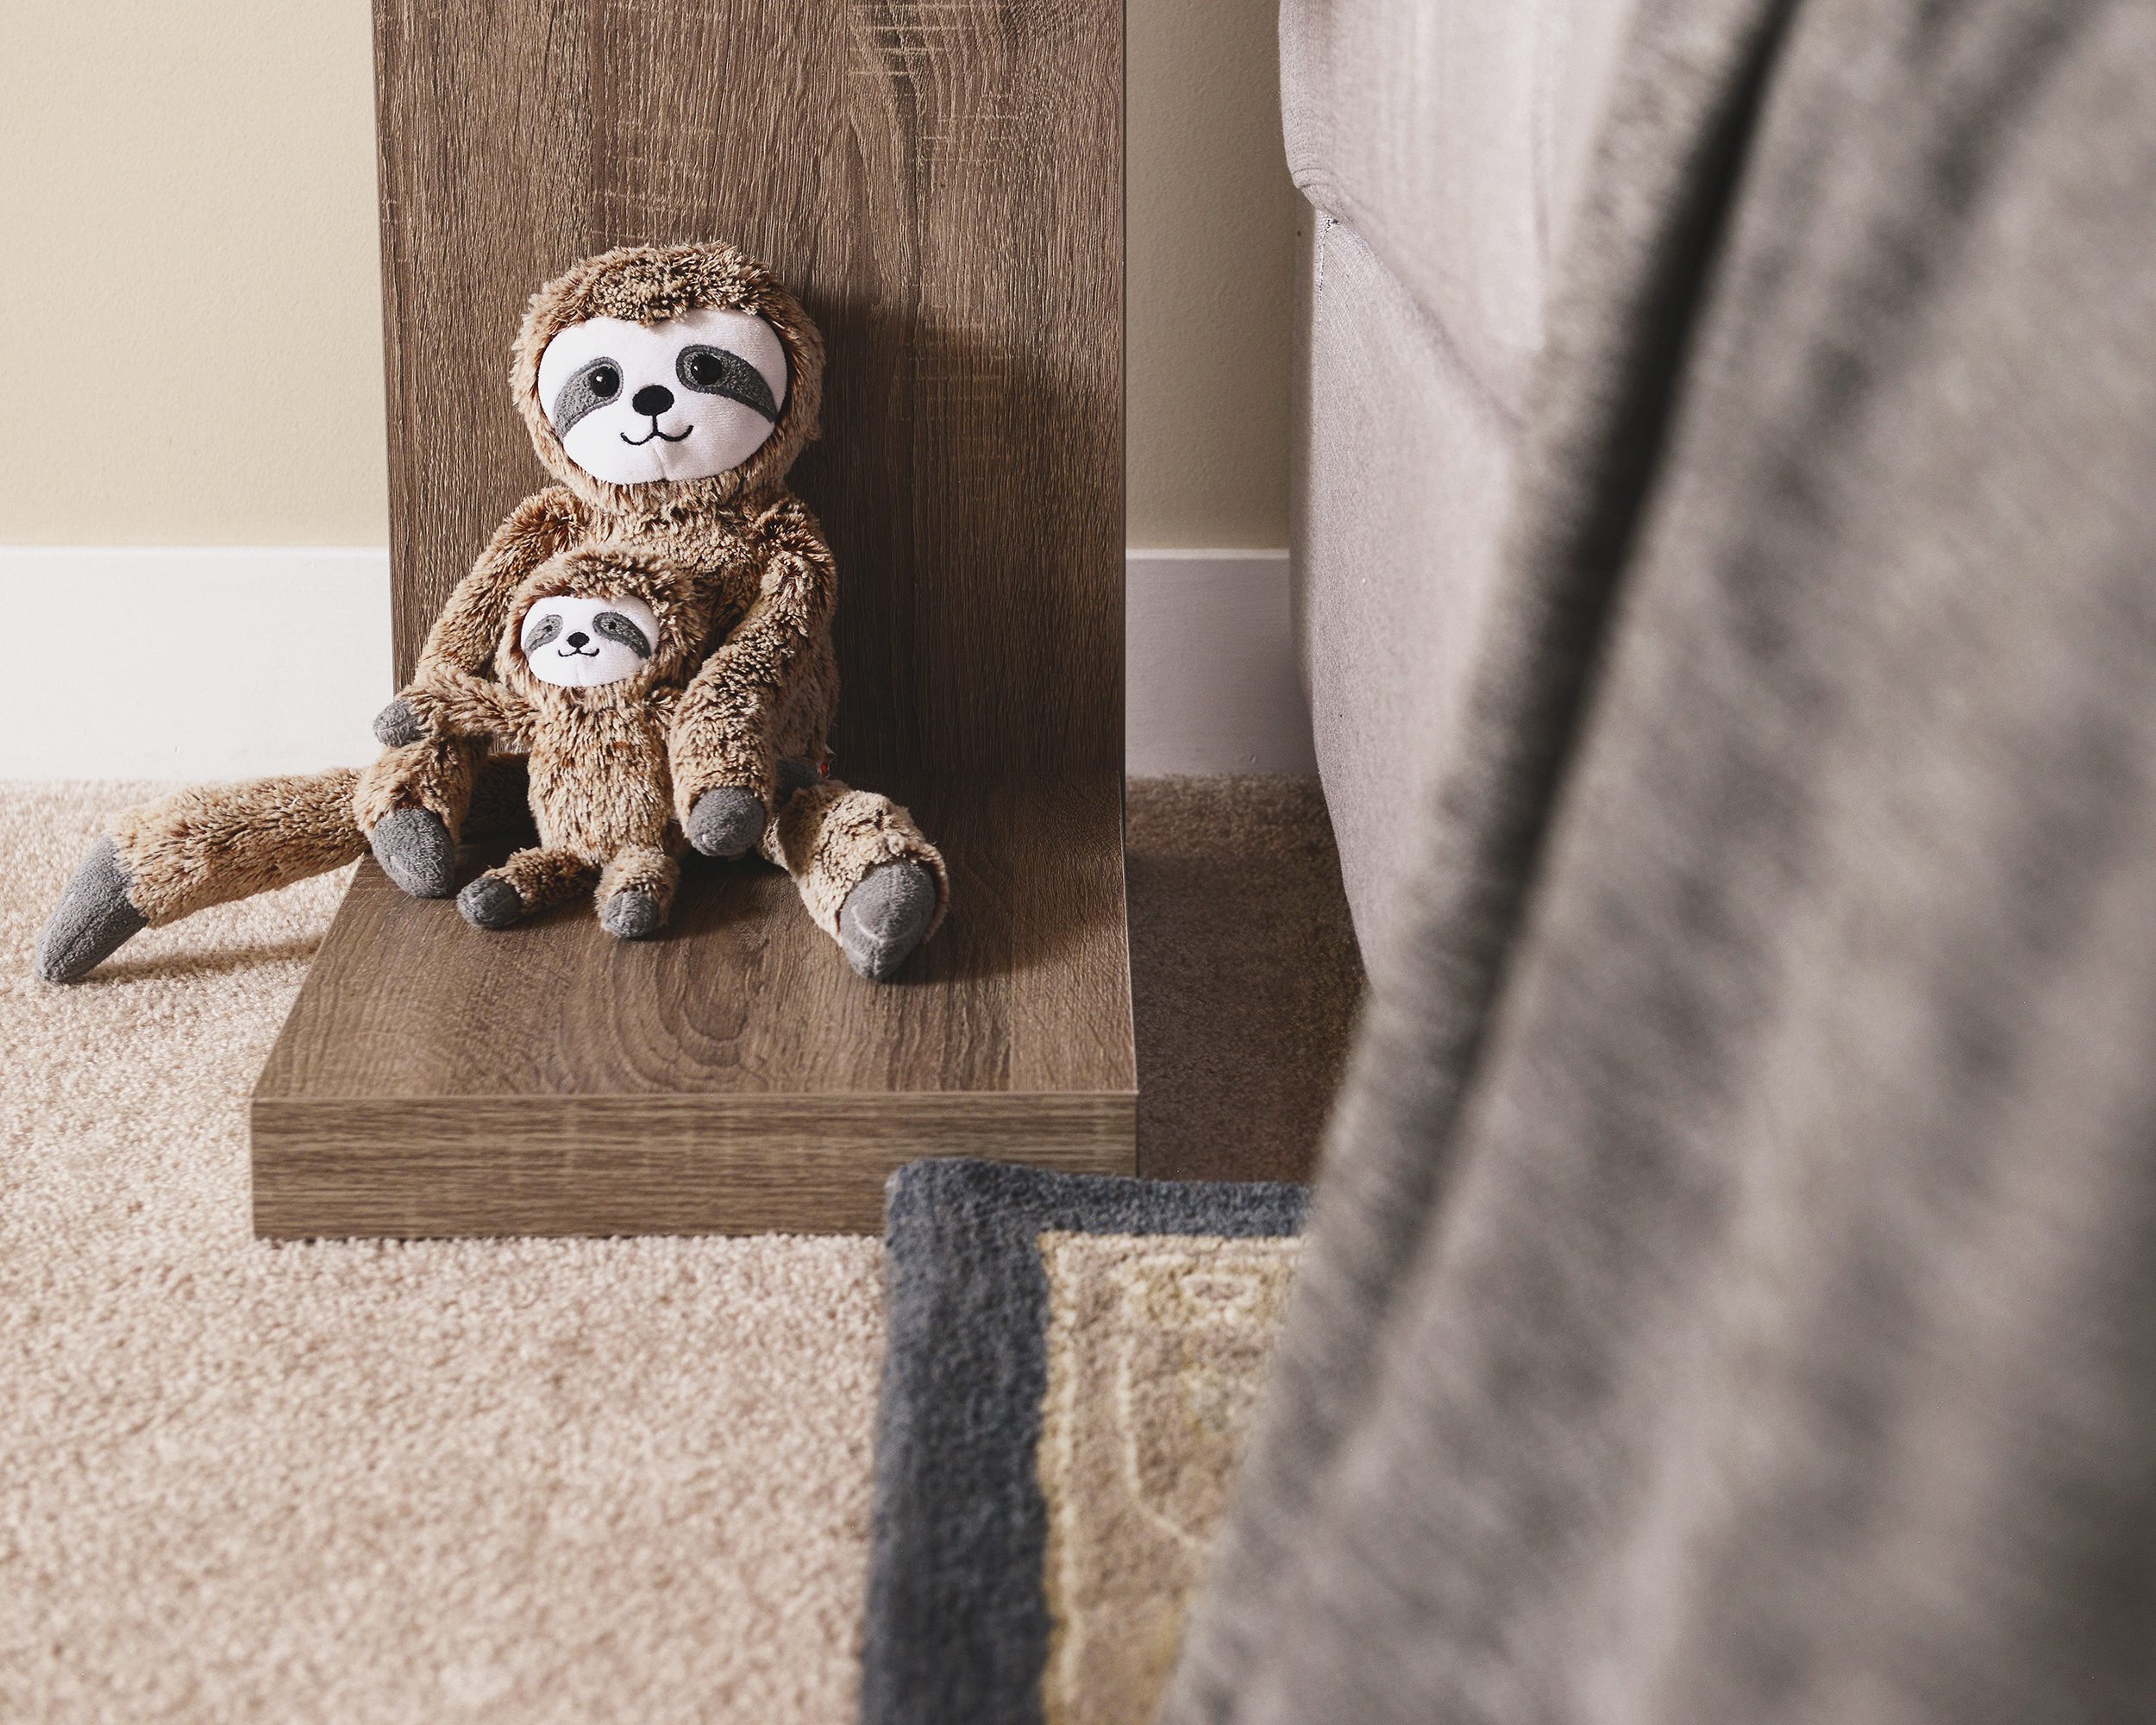 Sloth stuffie sitting on an end table | via Yellow Brick Home